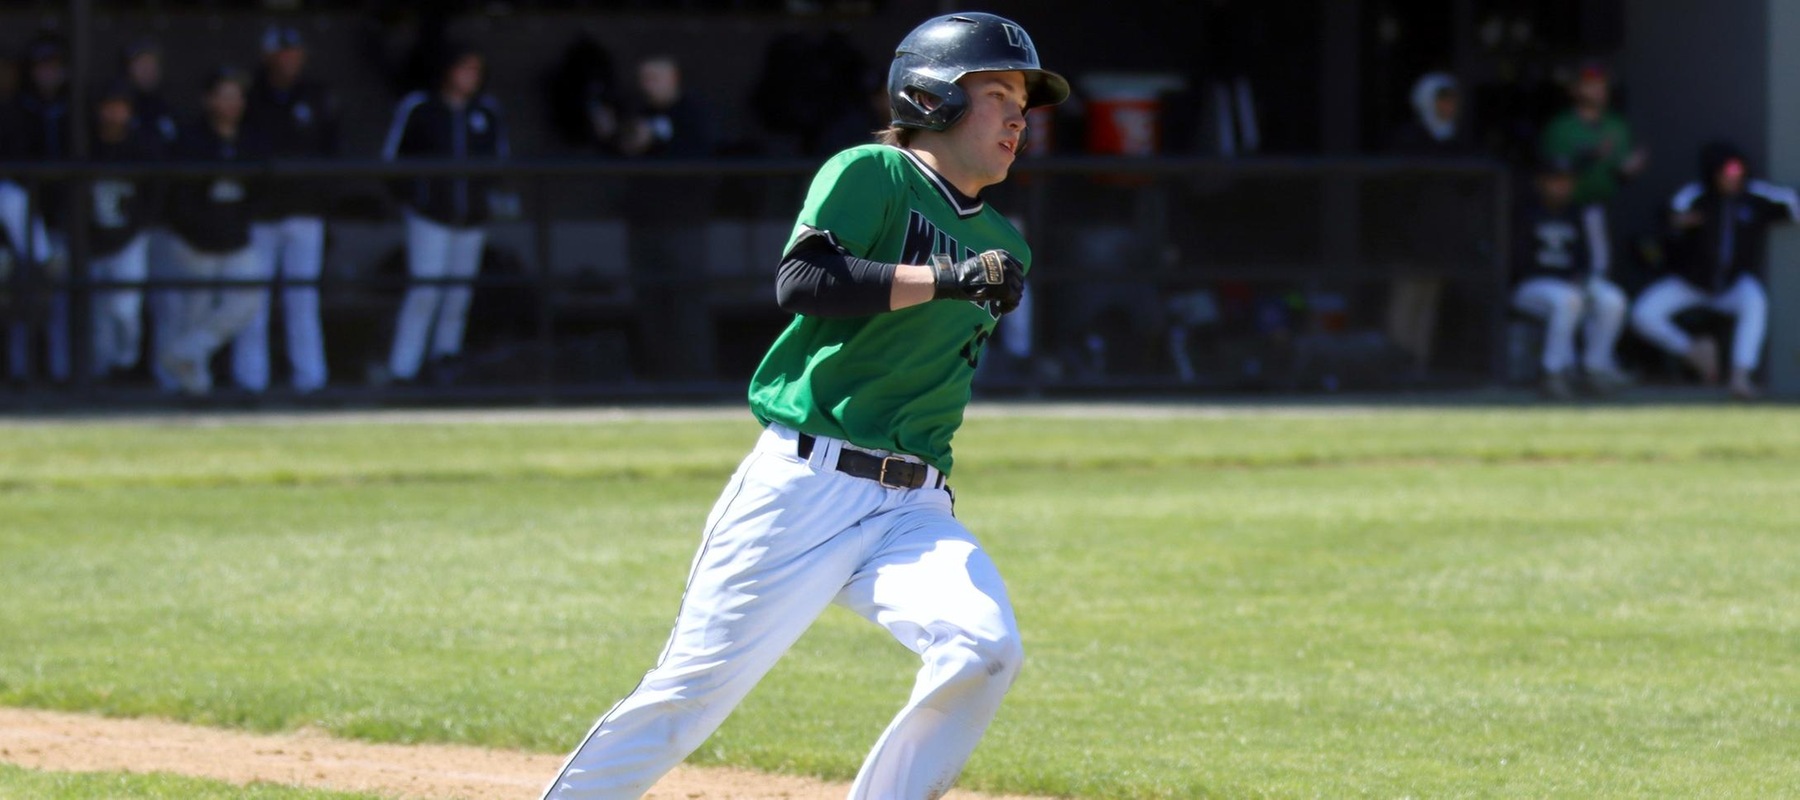 File photo of Erik Grady who went 2-for-3 at Millersville. Copyright 2023; Wilmington University. All rights reserved. Photo by Dan Lauletta. March 30, 2023 vs. Bridgeport.